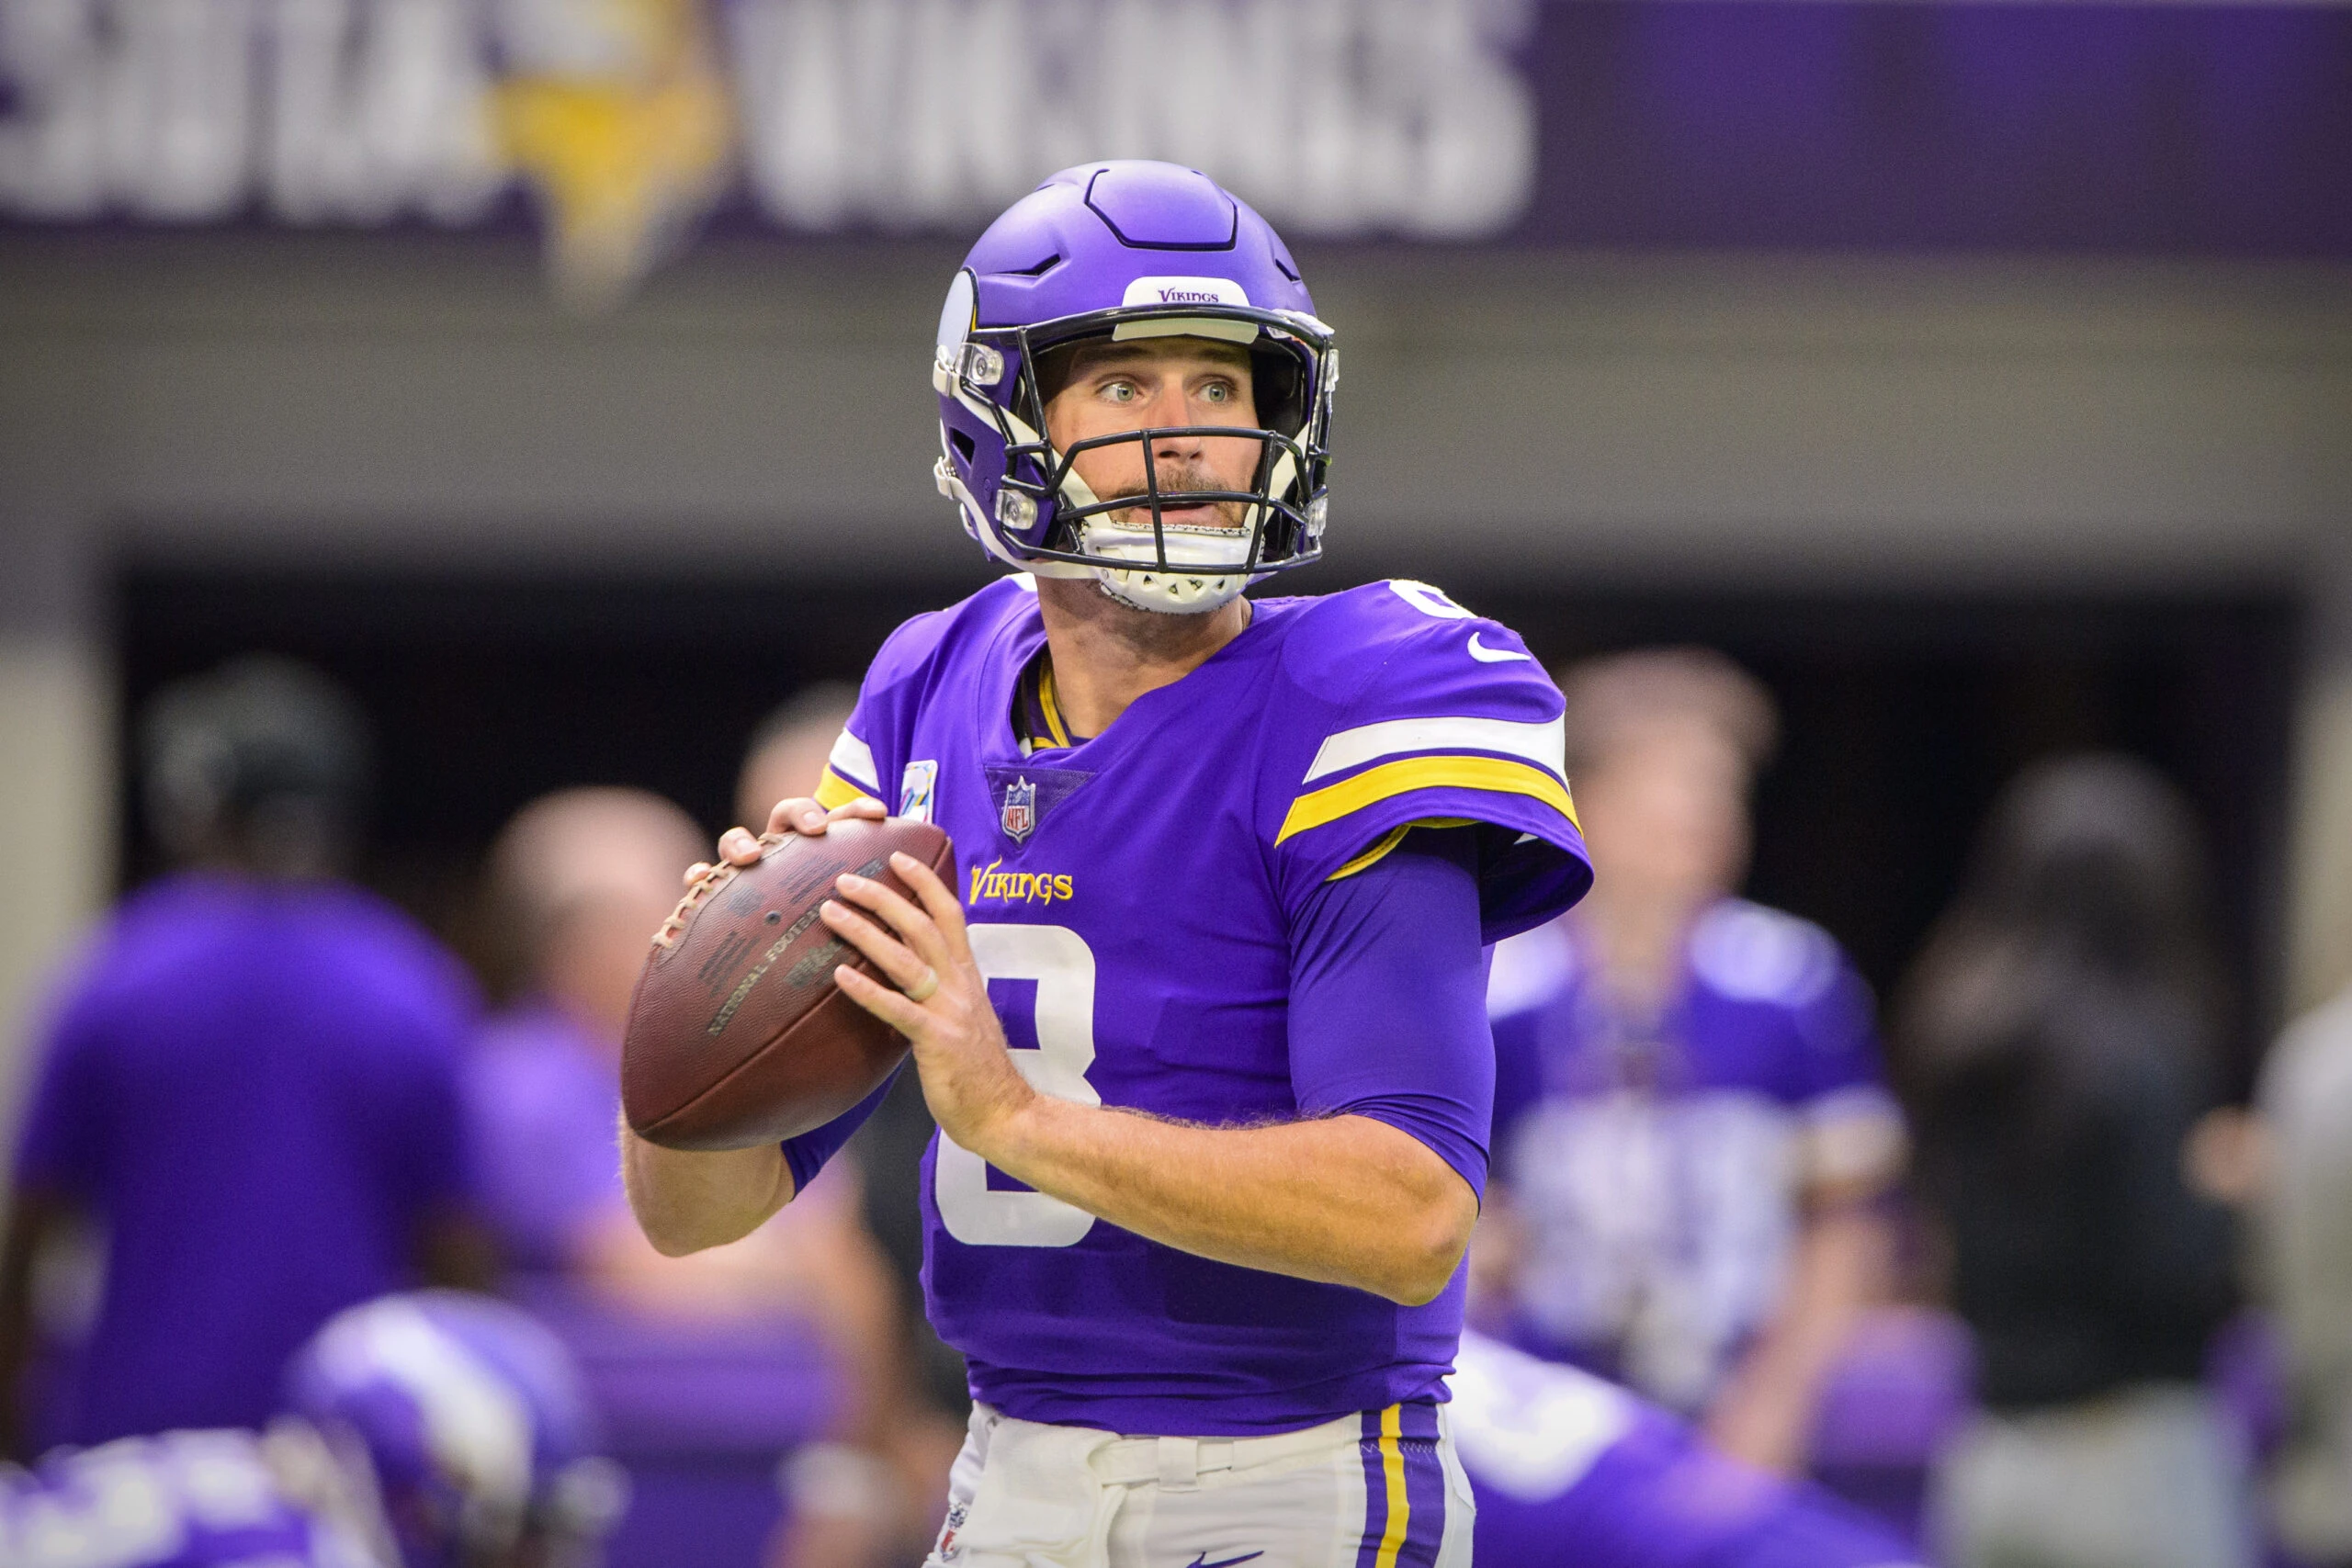 Minnesota Vikings quarterback #8 Kirk Cousins looks for an open receiver in a 2021 home game.